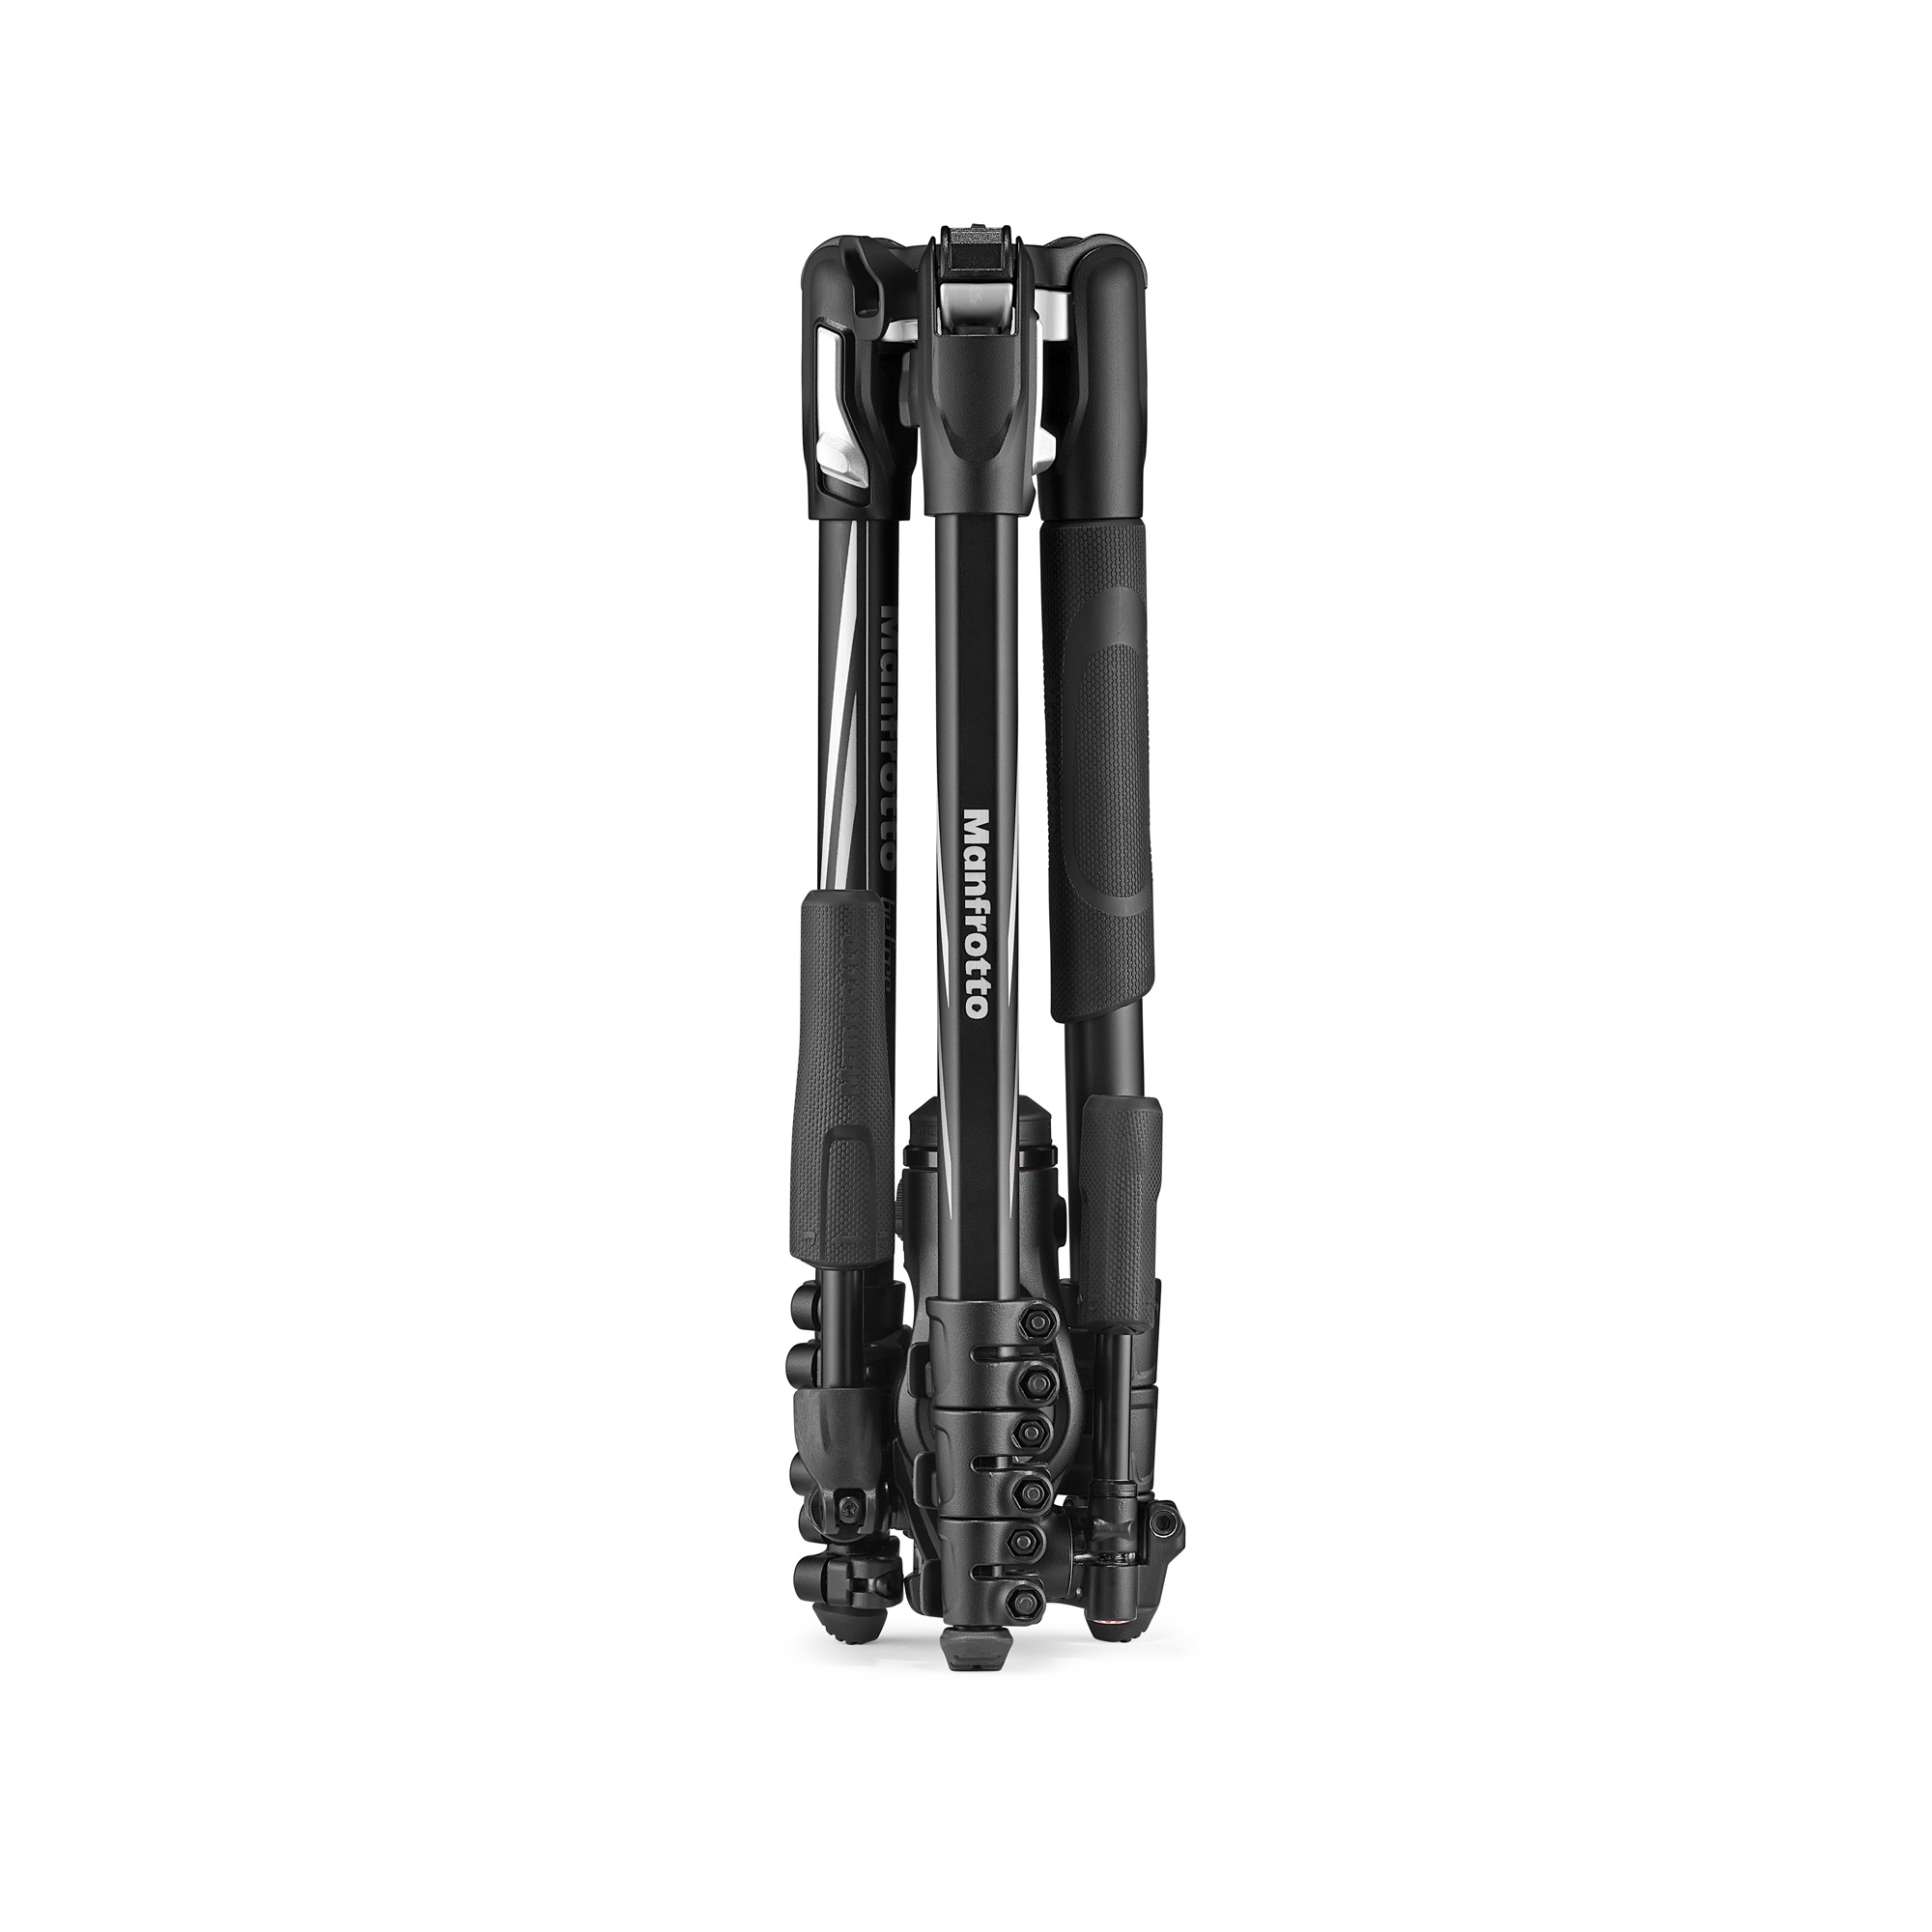 Manfrotto Befree 3-Way Live - Advanced